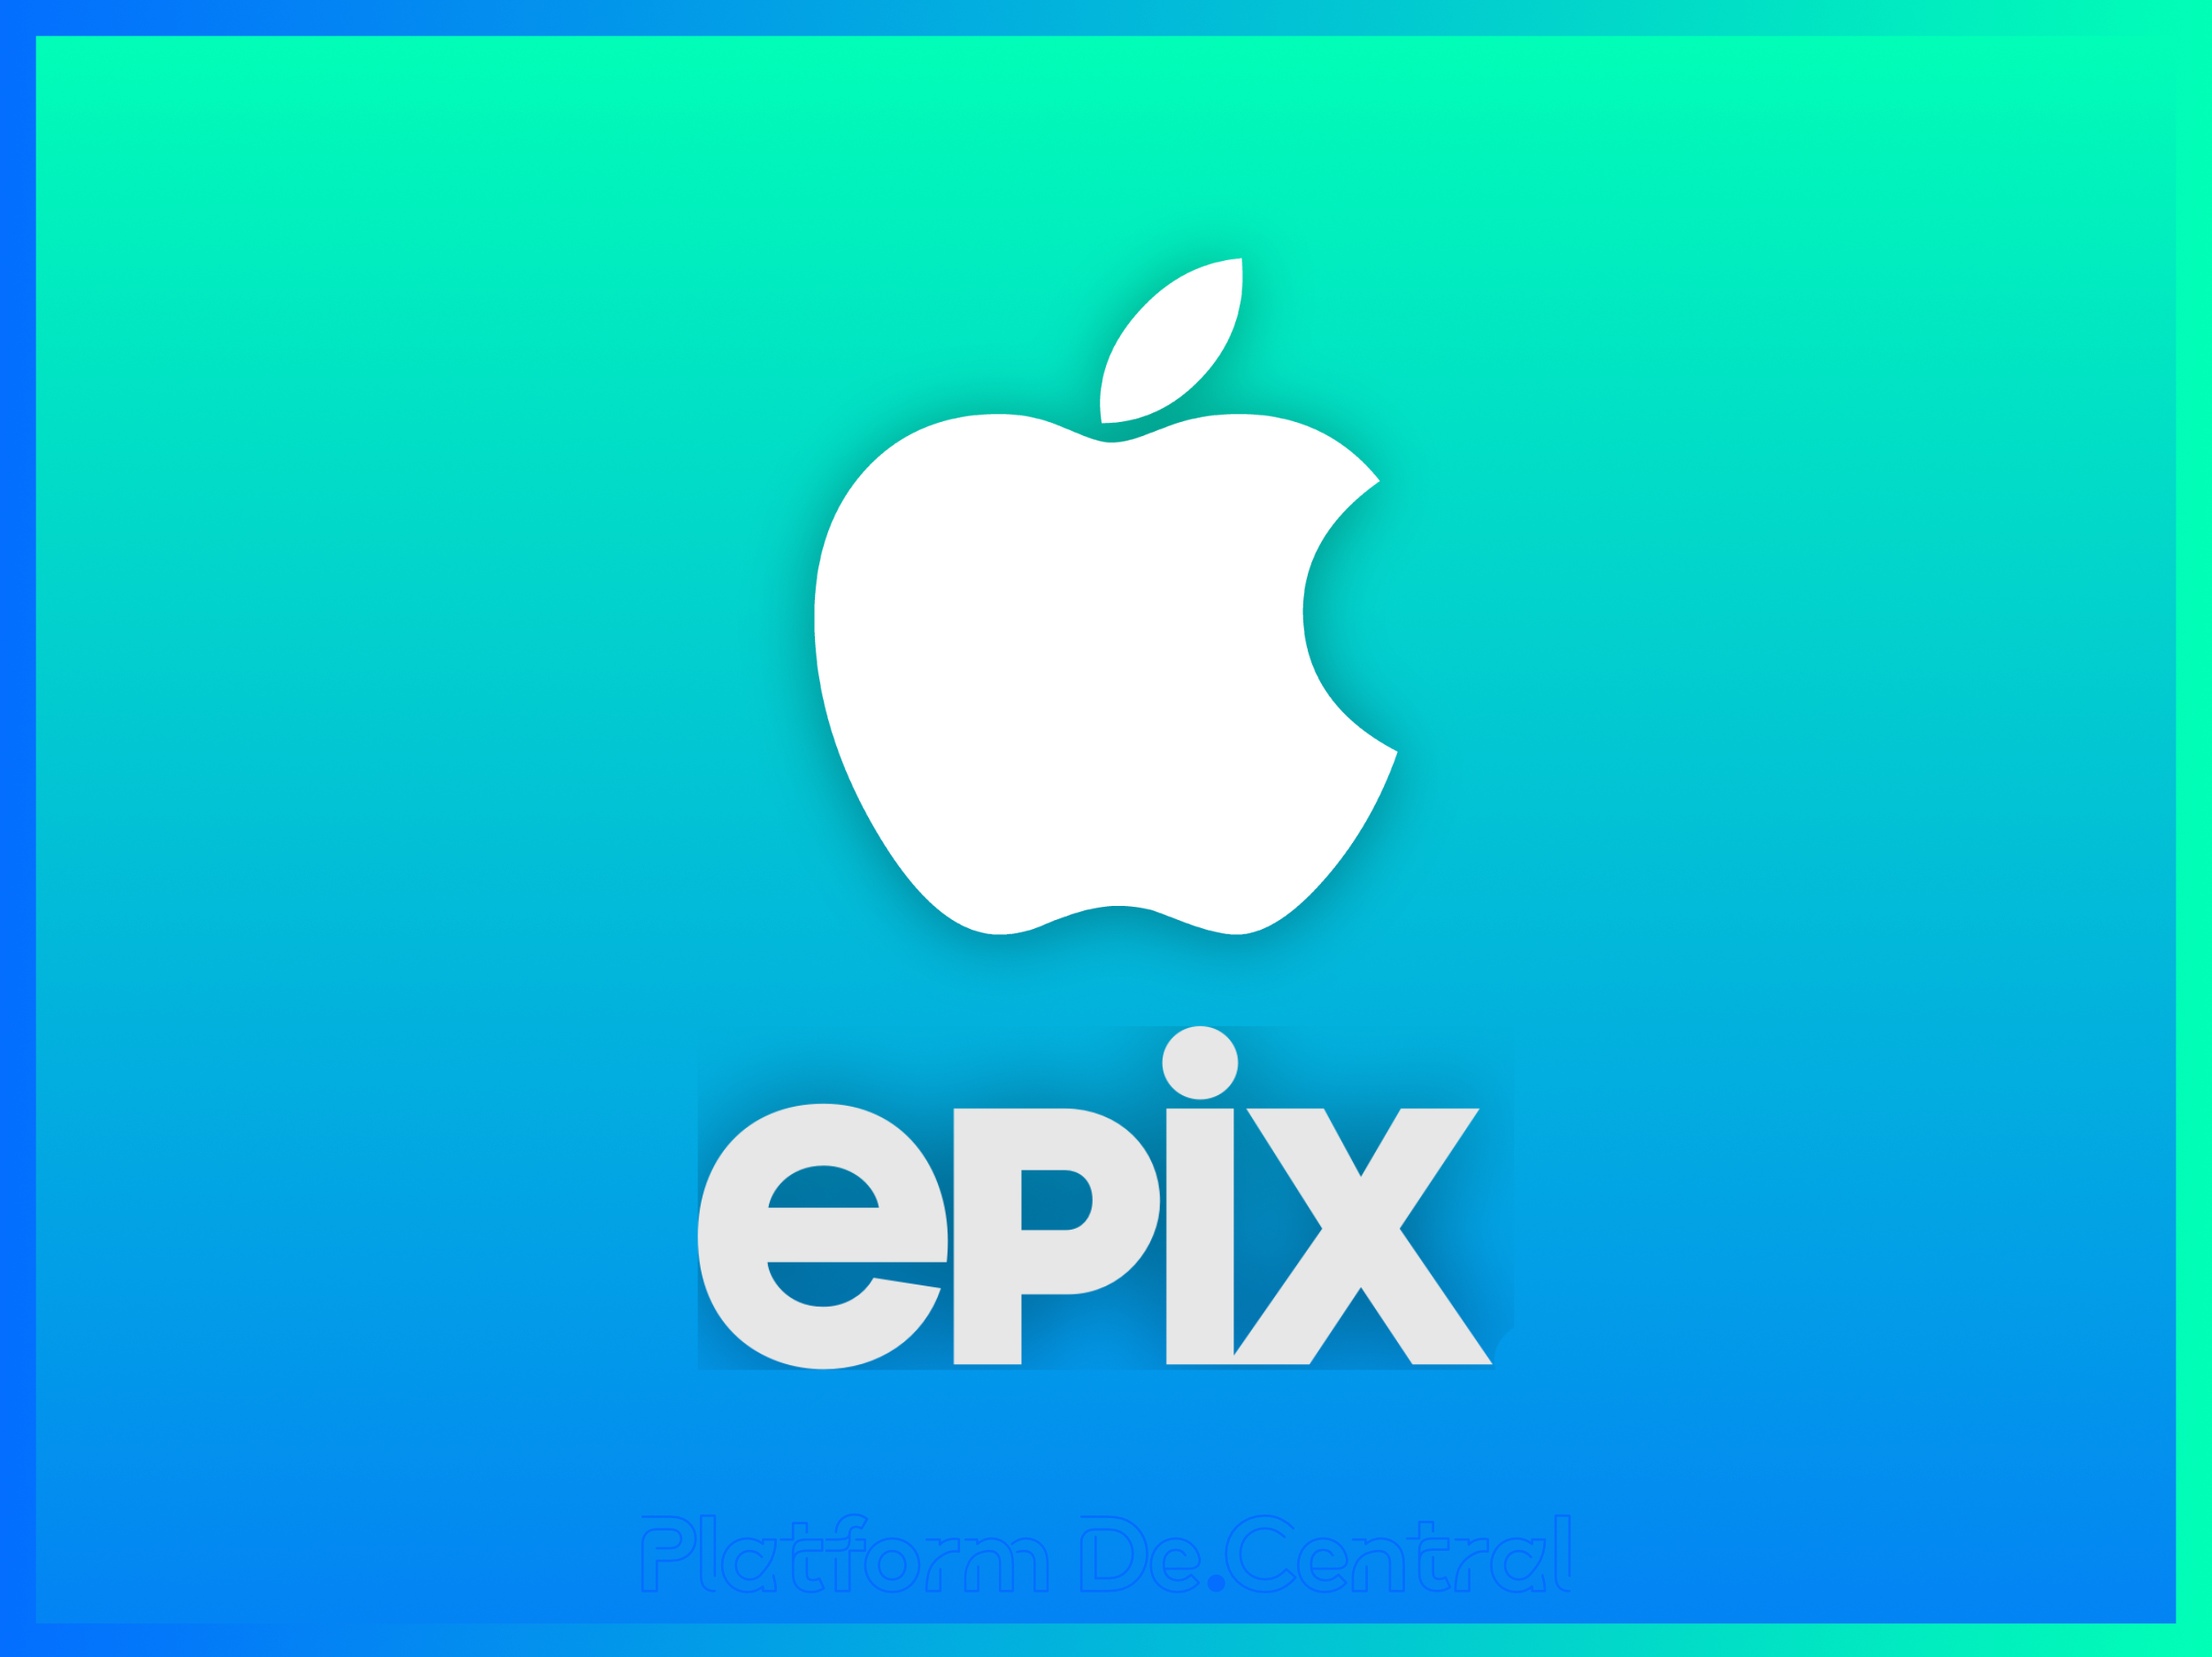 Apple TV channels offering Epix for free